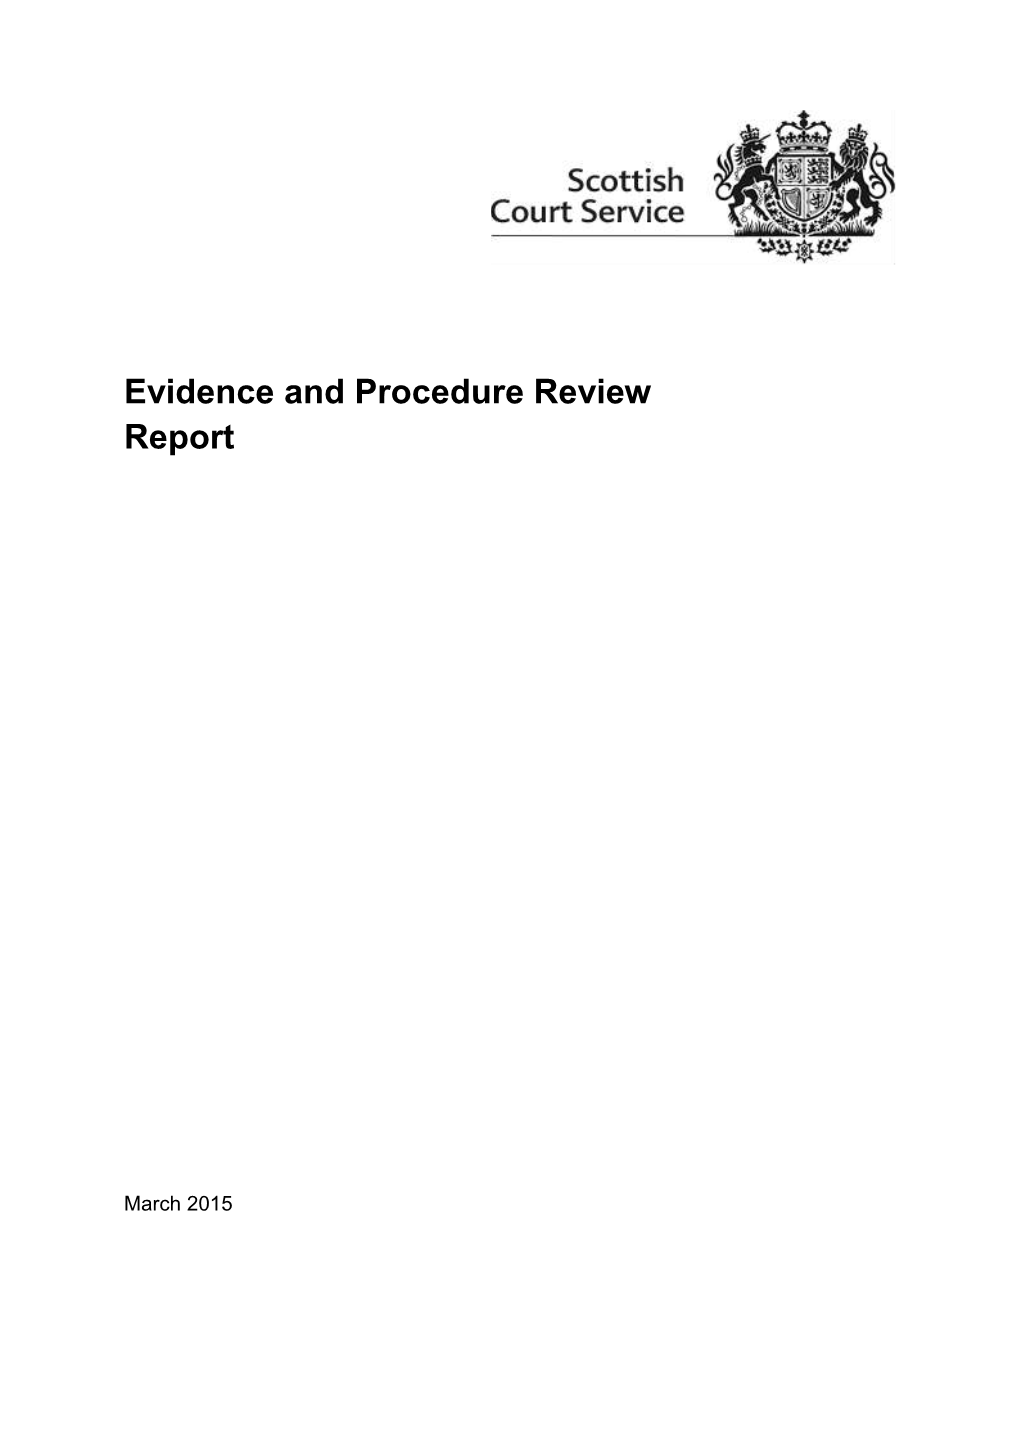 Evidence and Procedure Review Report